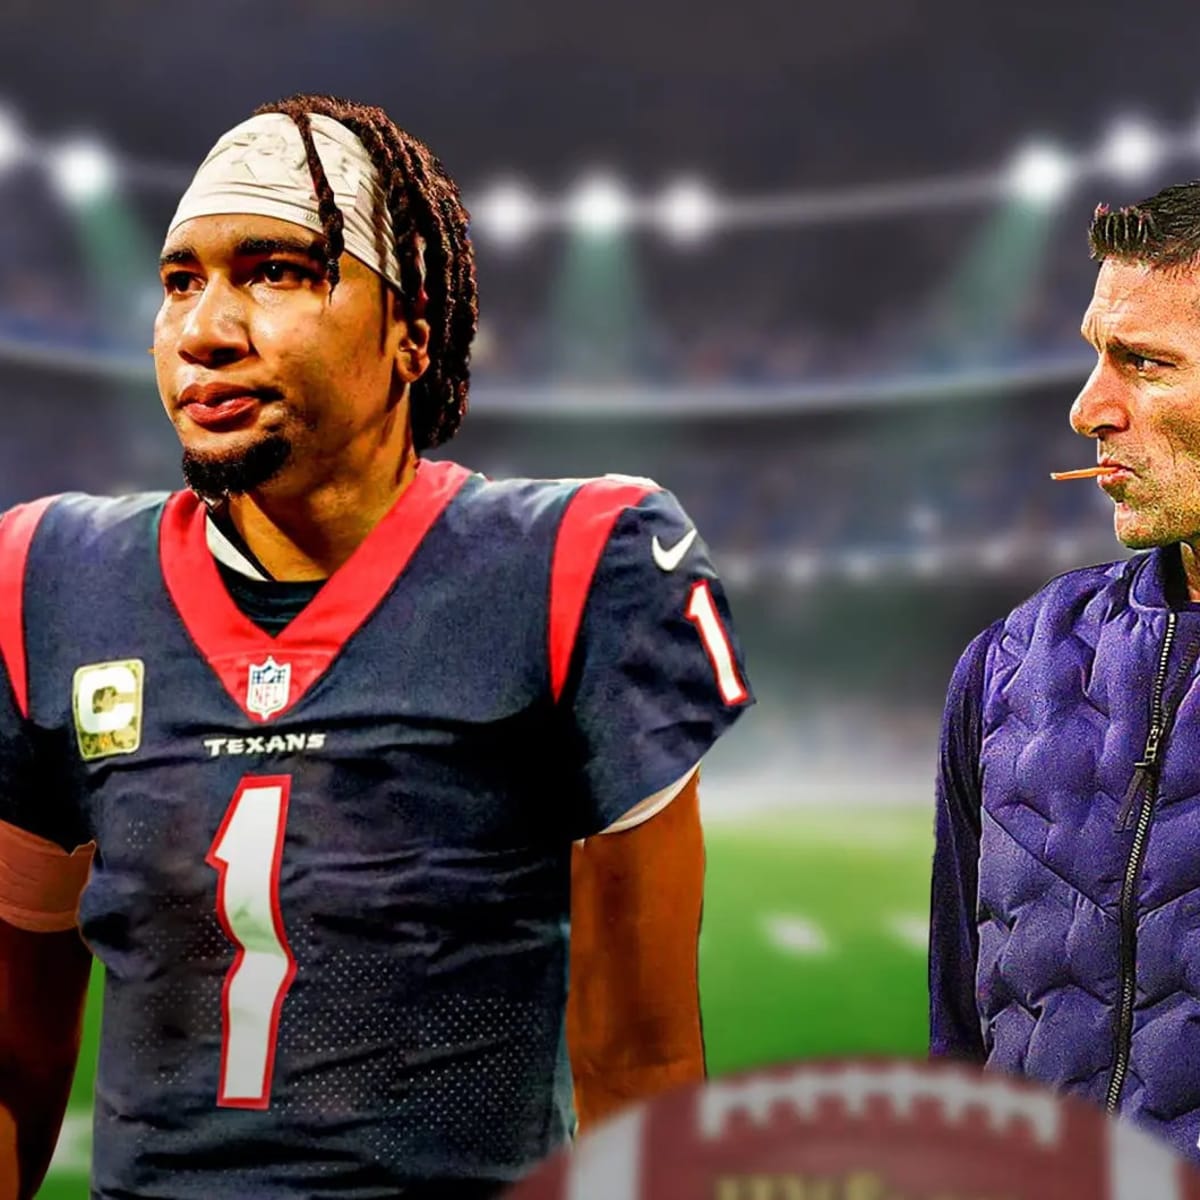 2023 NFL draft: Where would the Texans pick in Round 1?